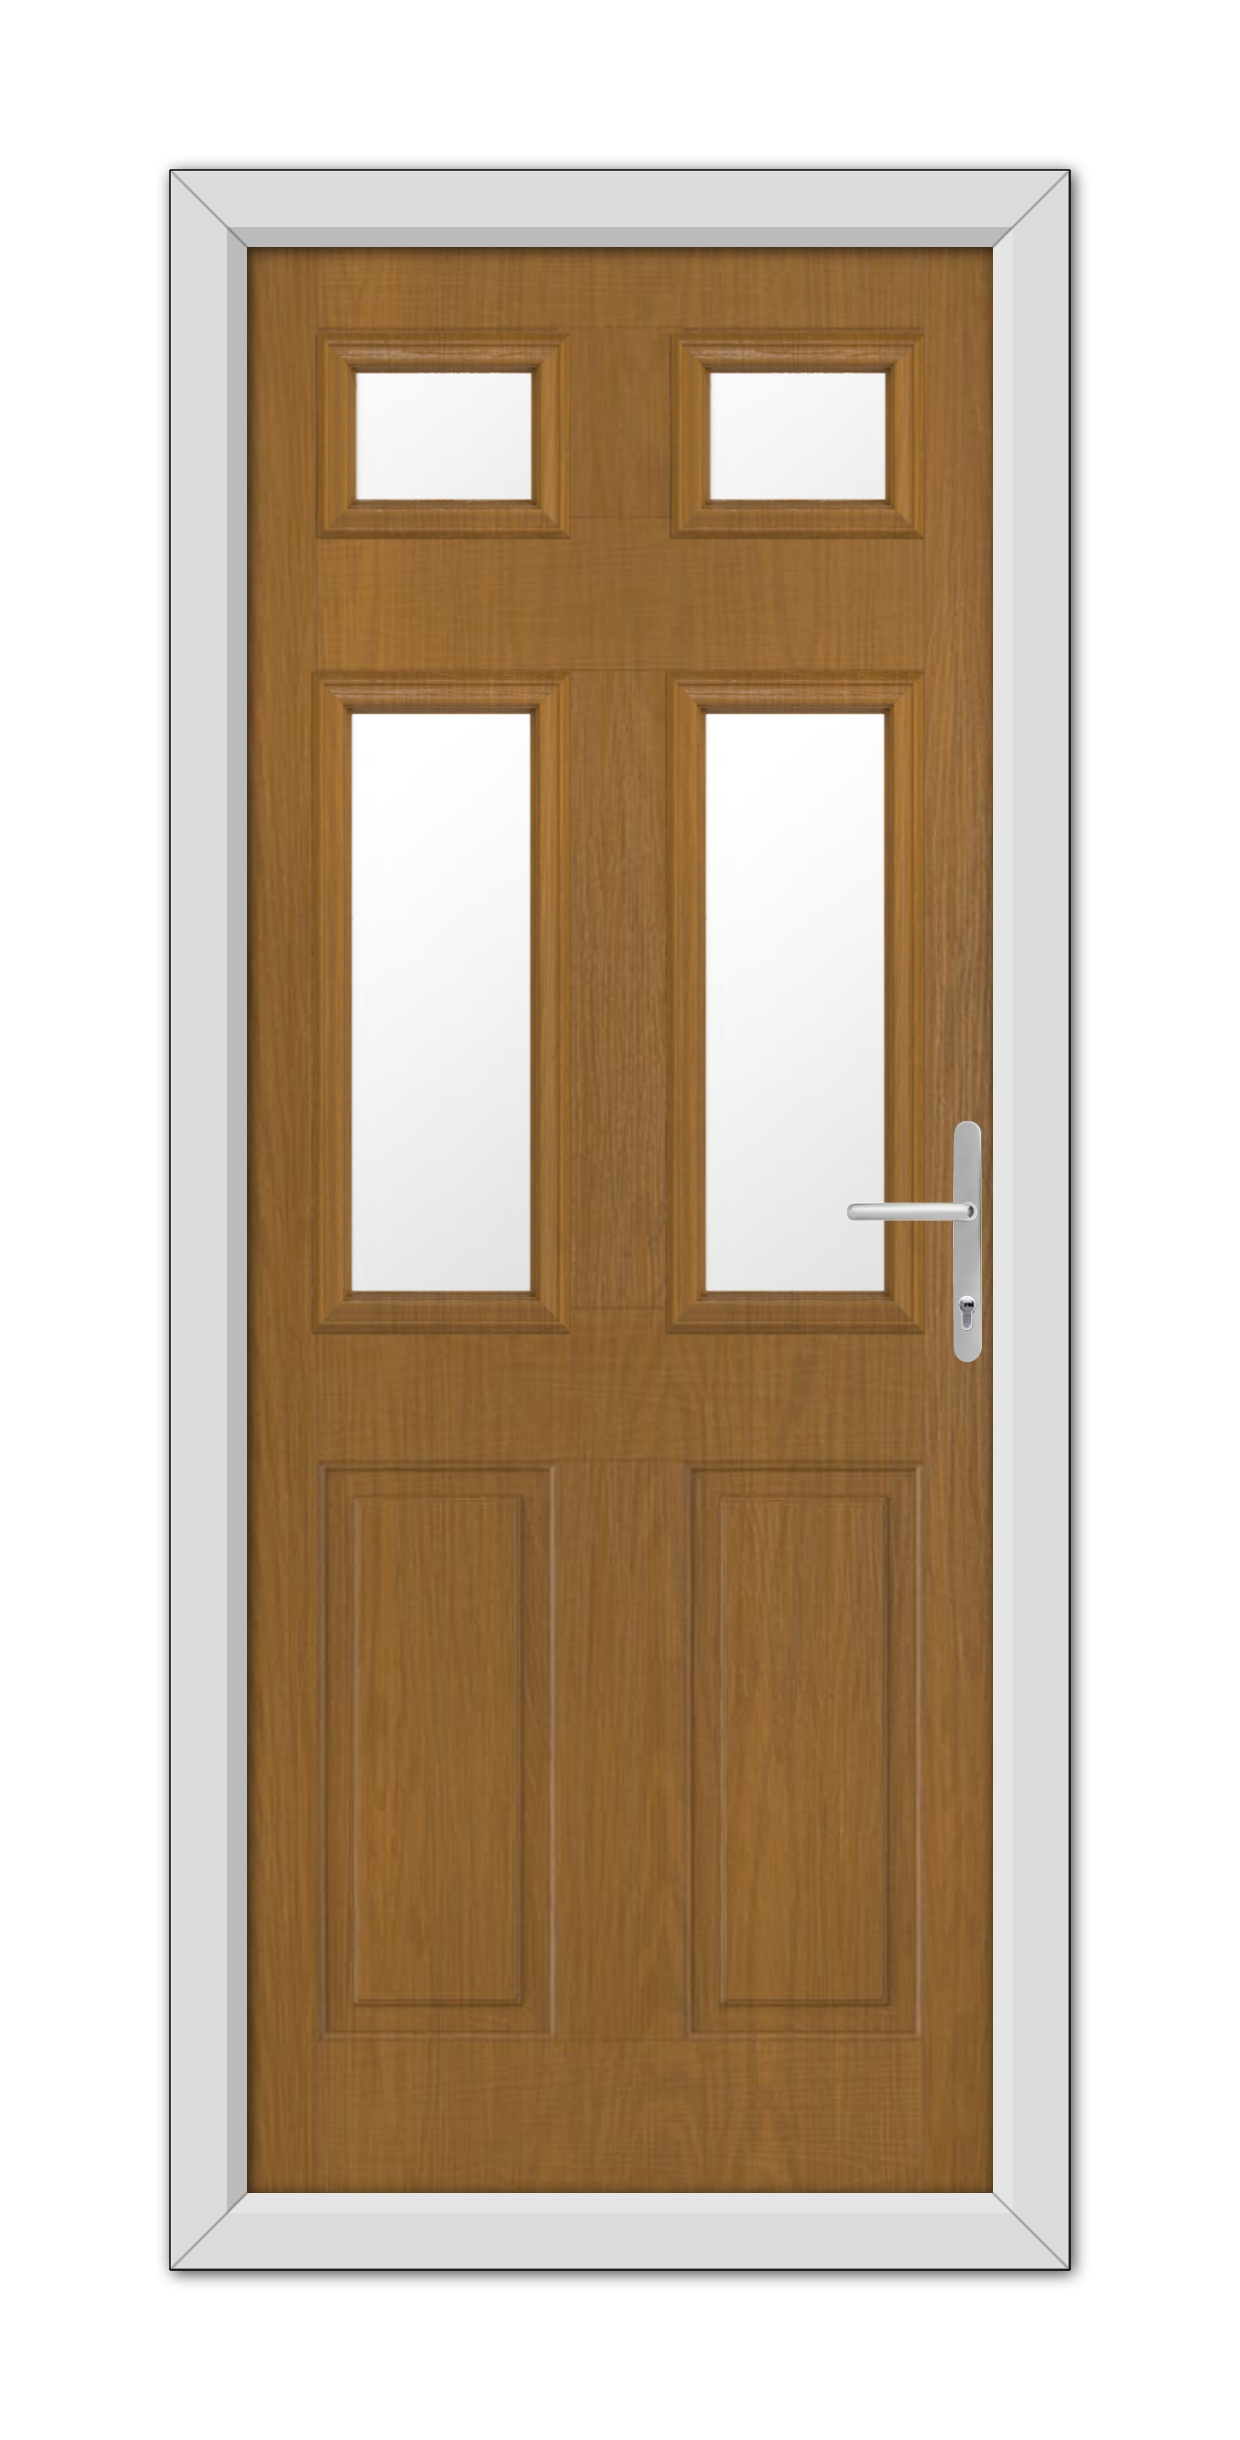 A Oak Middleton Glazed 4 Composite Door with two small rectangular windows near the top and a metallic handle on the right side, set within a white door frame.